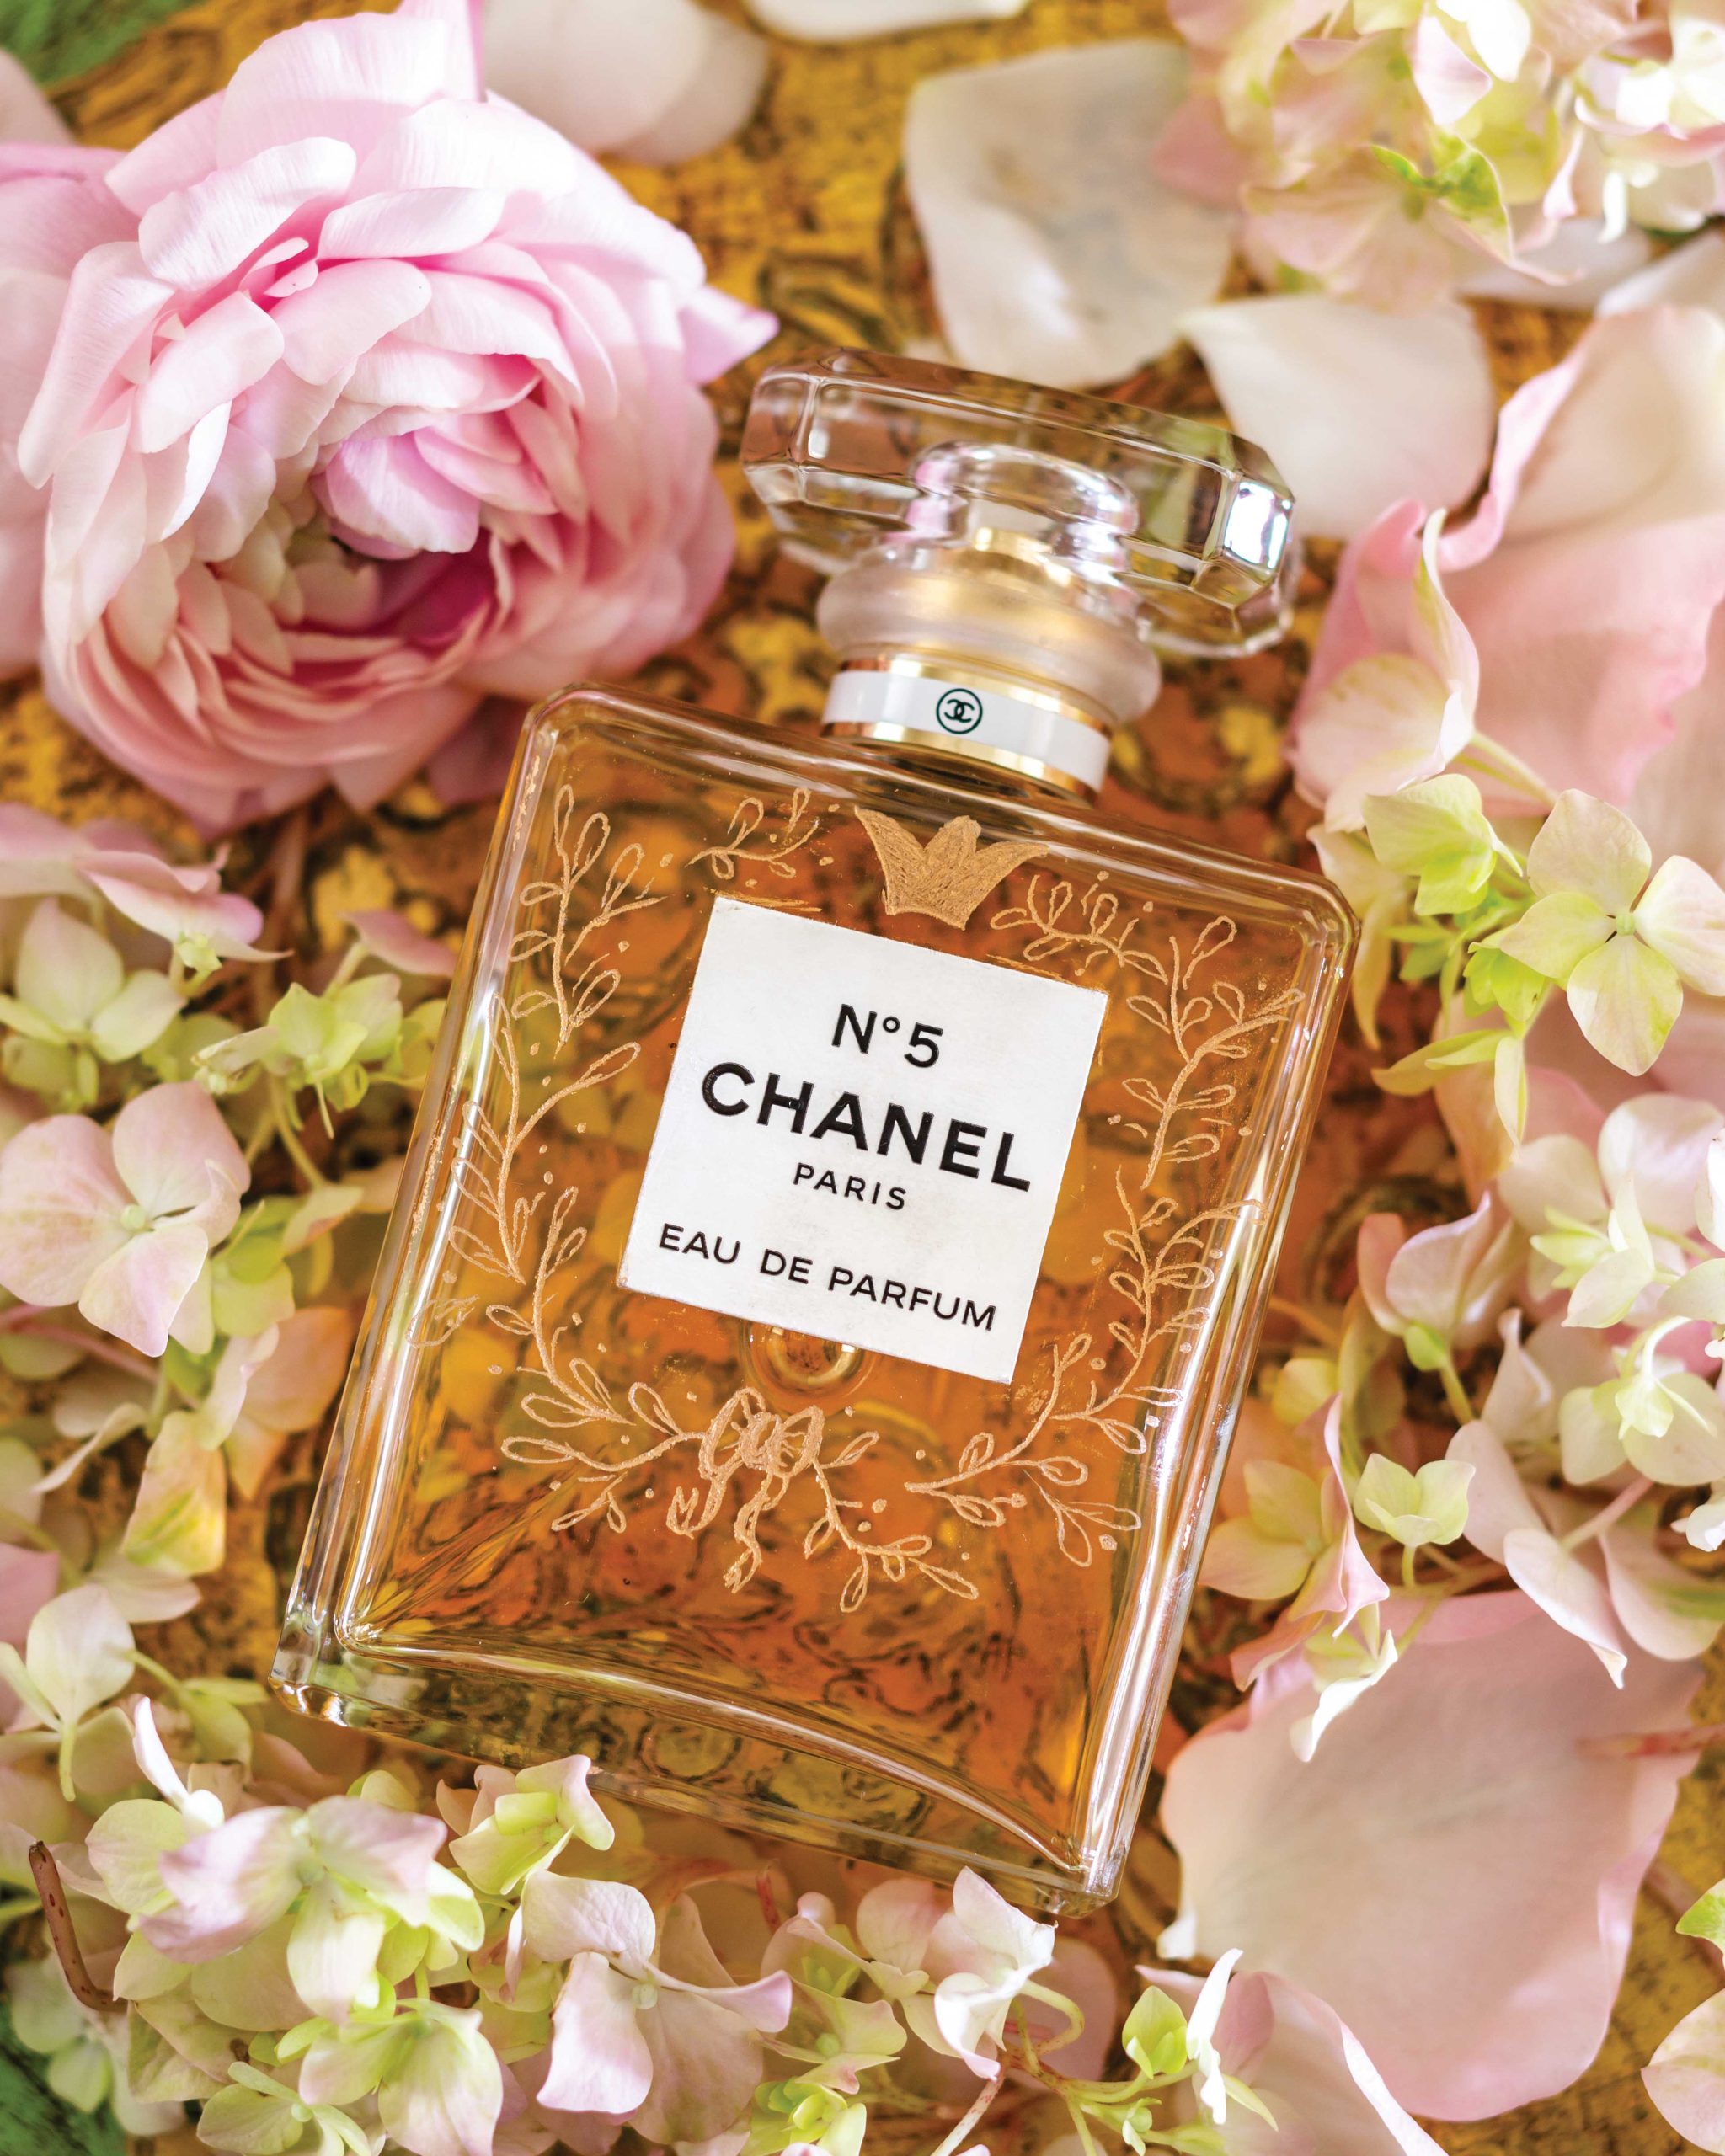 Surrounded by romantic blossoms, a bottle of Chanel No. 5 perfume has been engraved with laurel leaves and ribbon motifs.